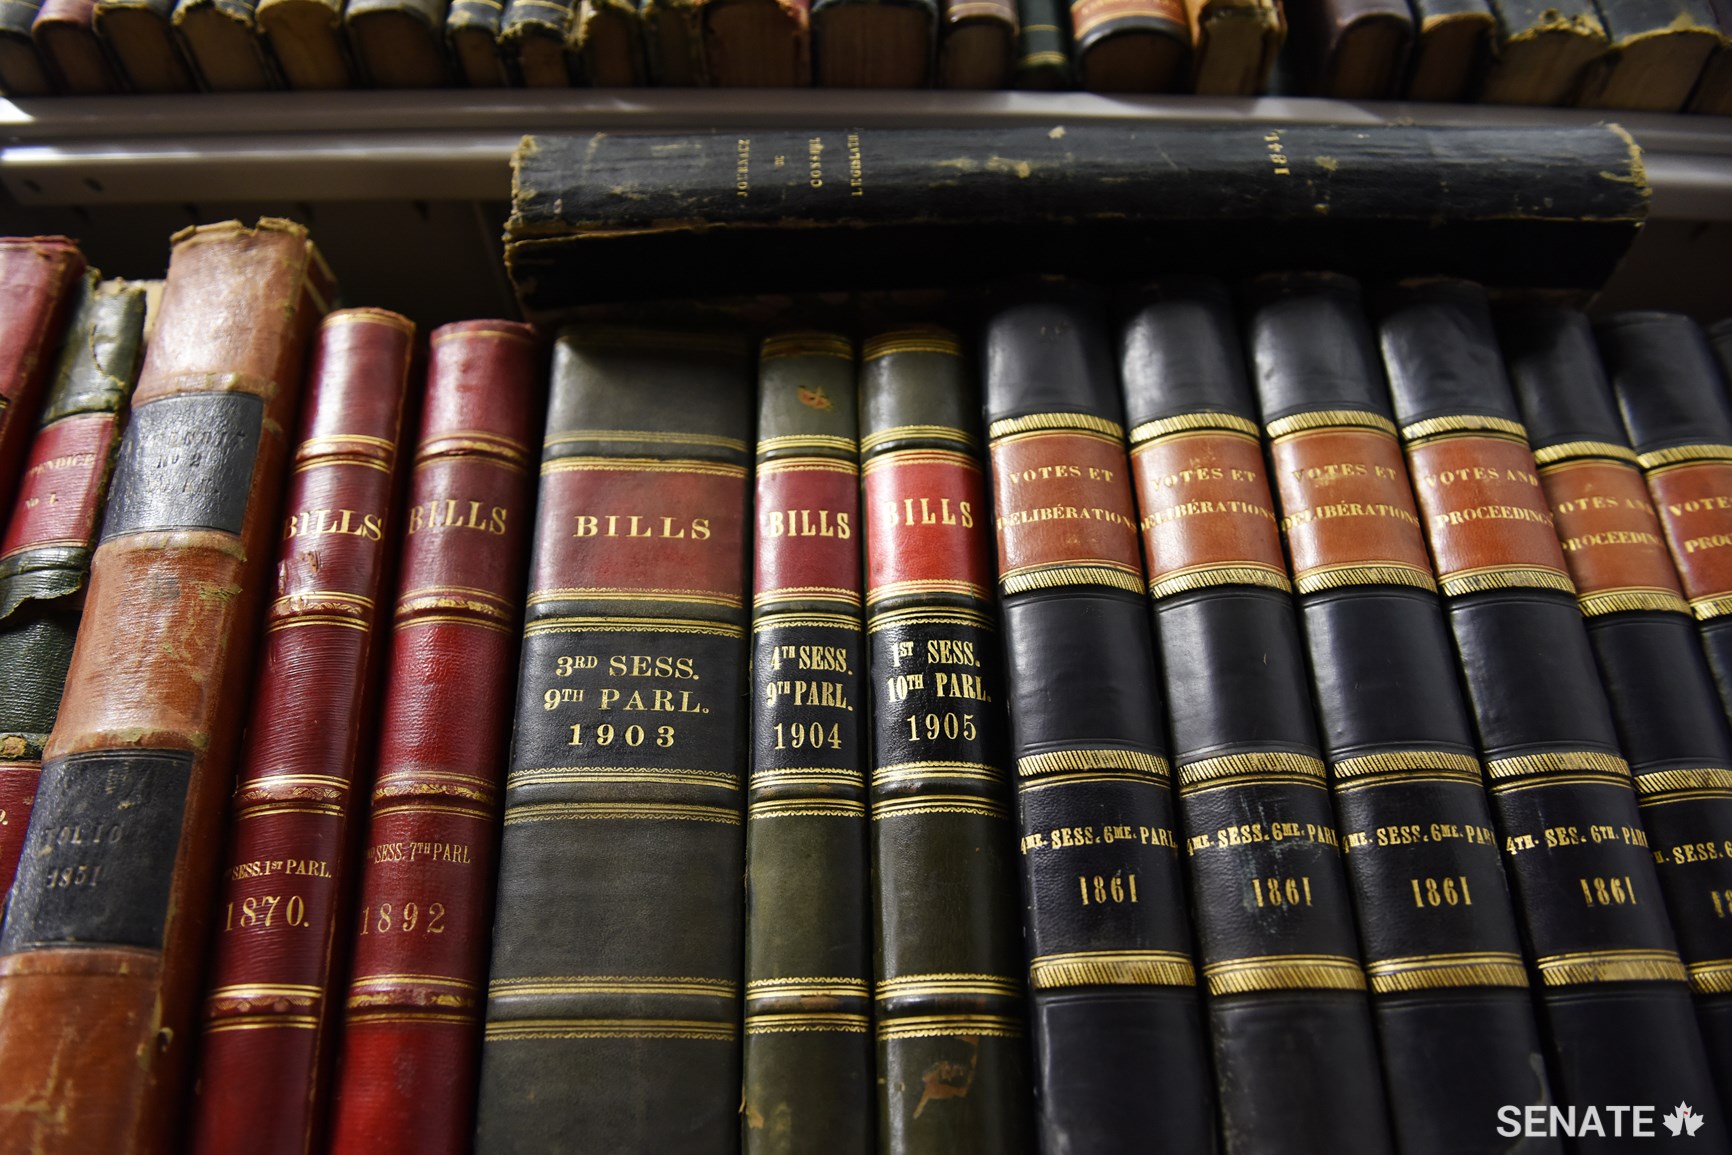 One of the vaults in the Senate archives is lined with rare, historic leather-bound volumes of parliamentary records.